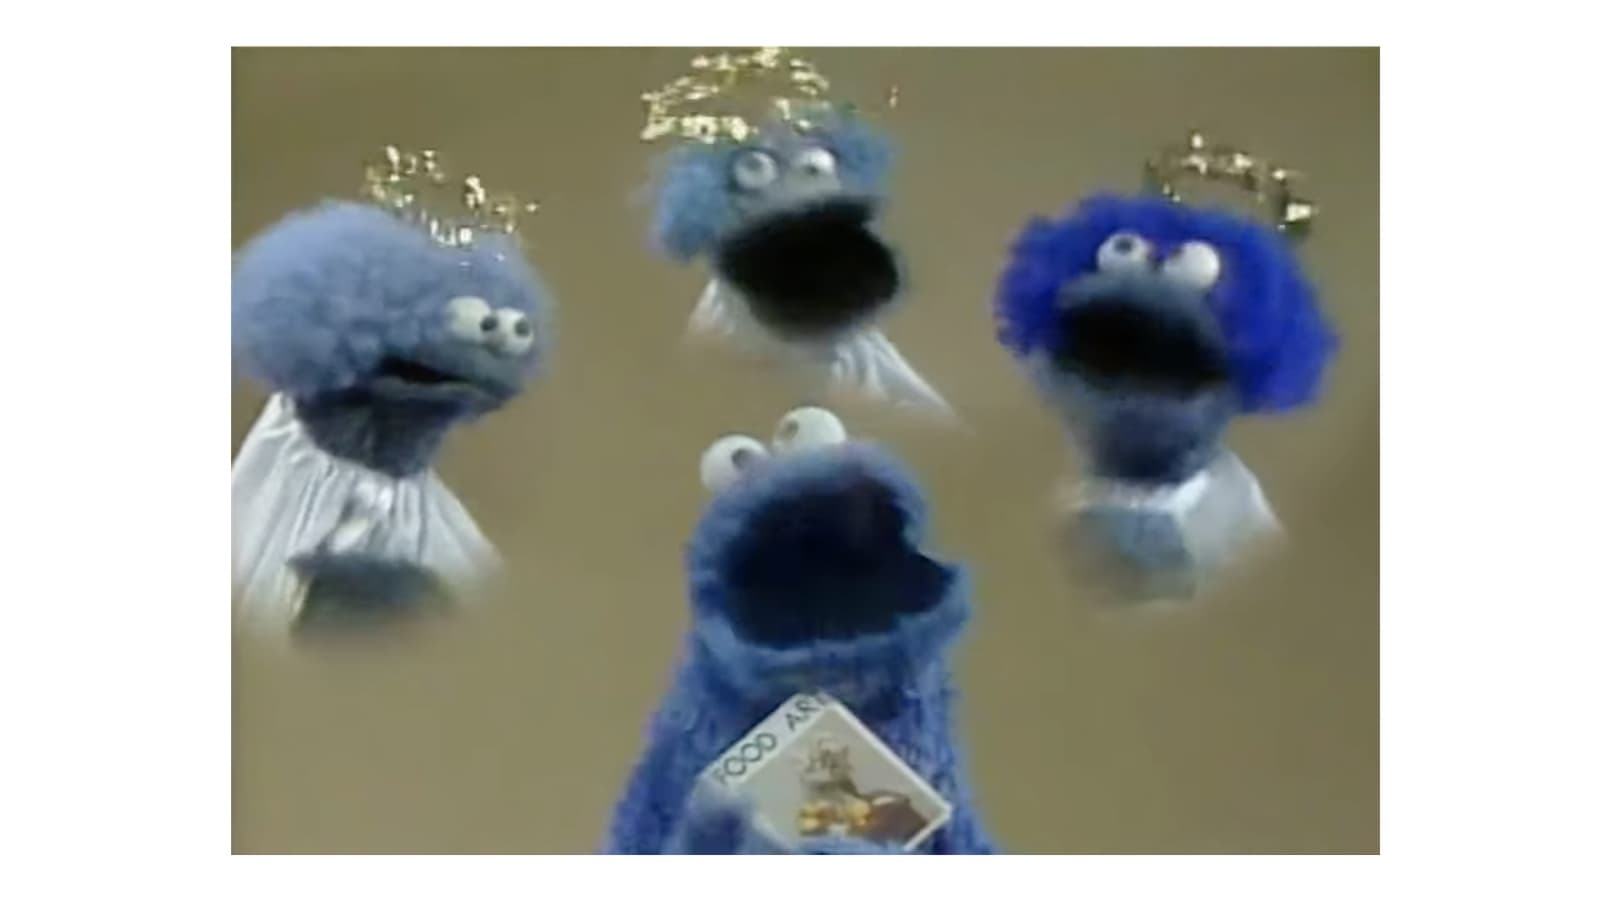 Don't Eat the Pictures: Sesame Street at the Metropolitan Museum of Art (1983)